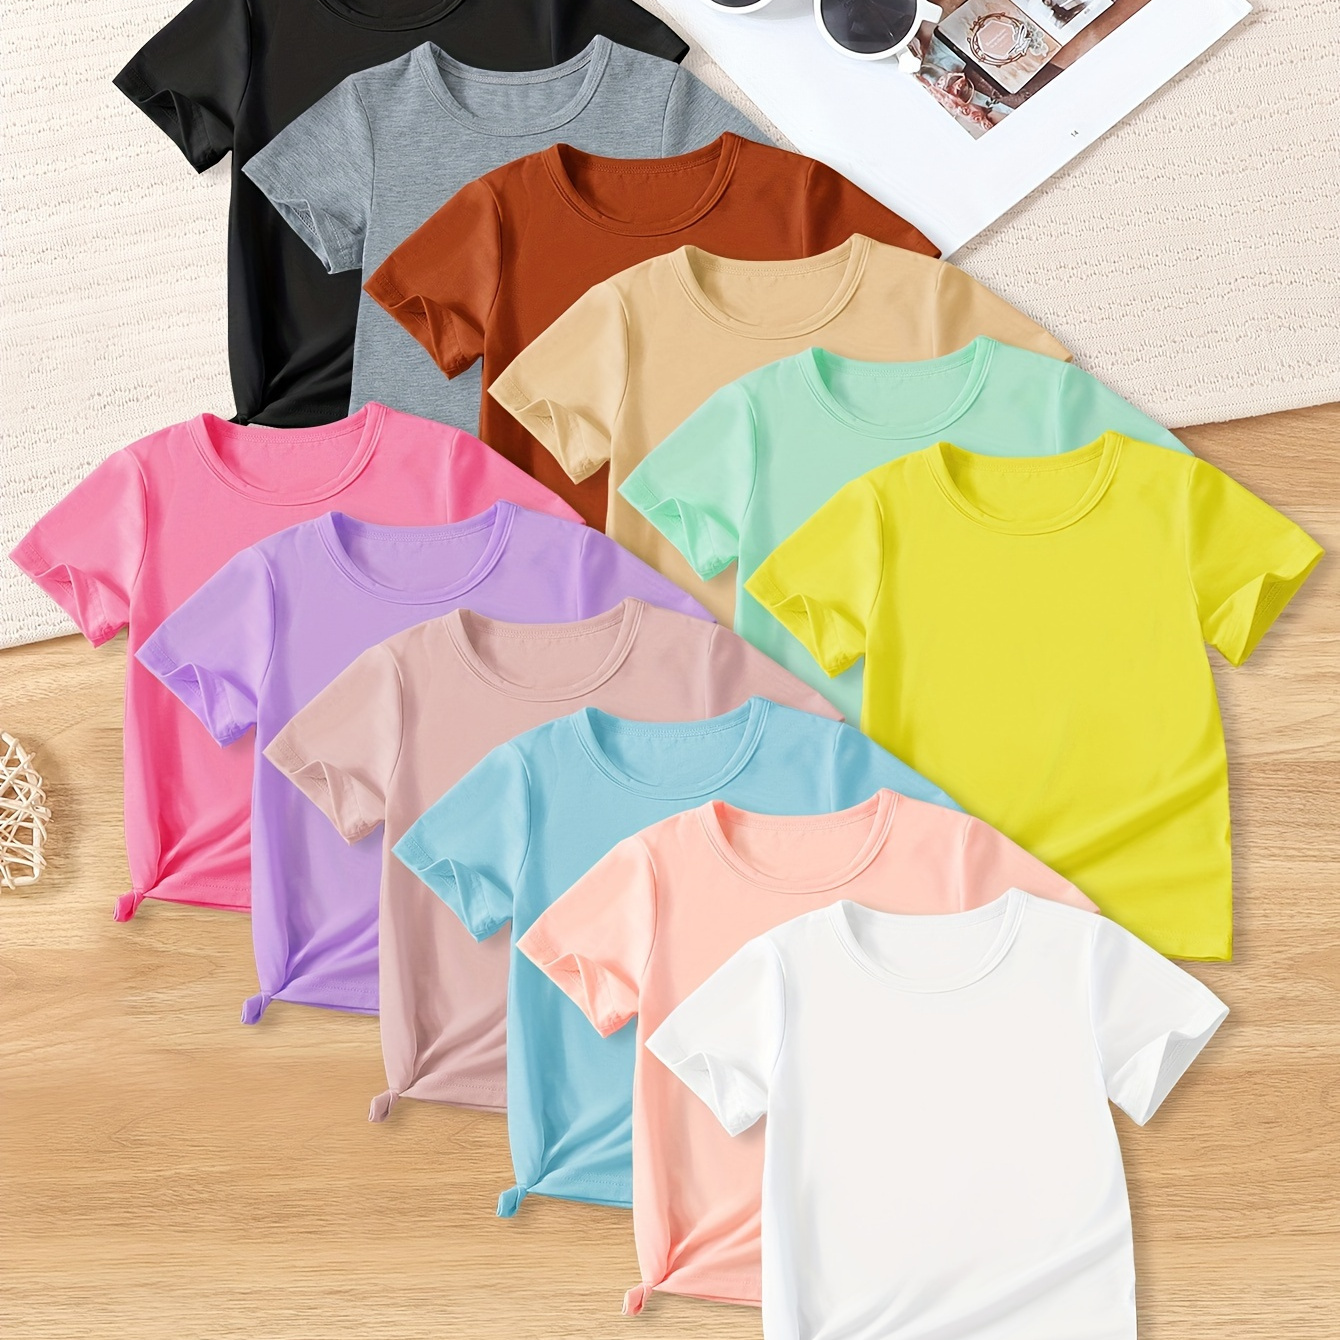 

Girls 12pcs/set Casual & Comfy Solid Colored Tees For Summer, Girls Versatile Clothes